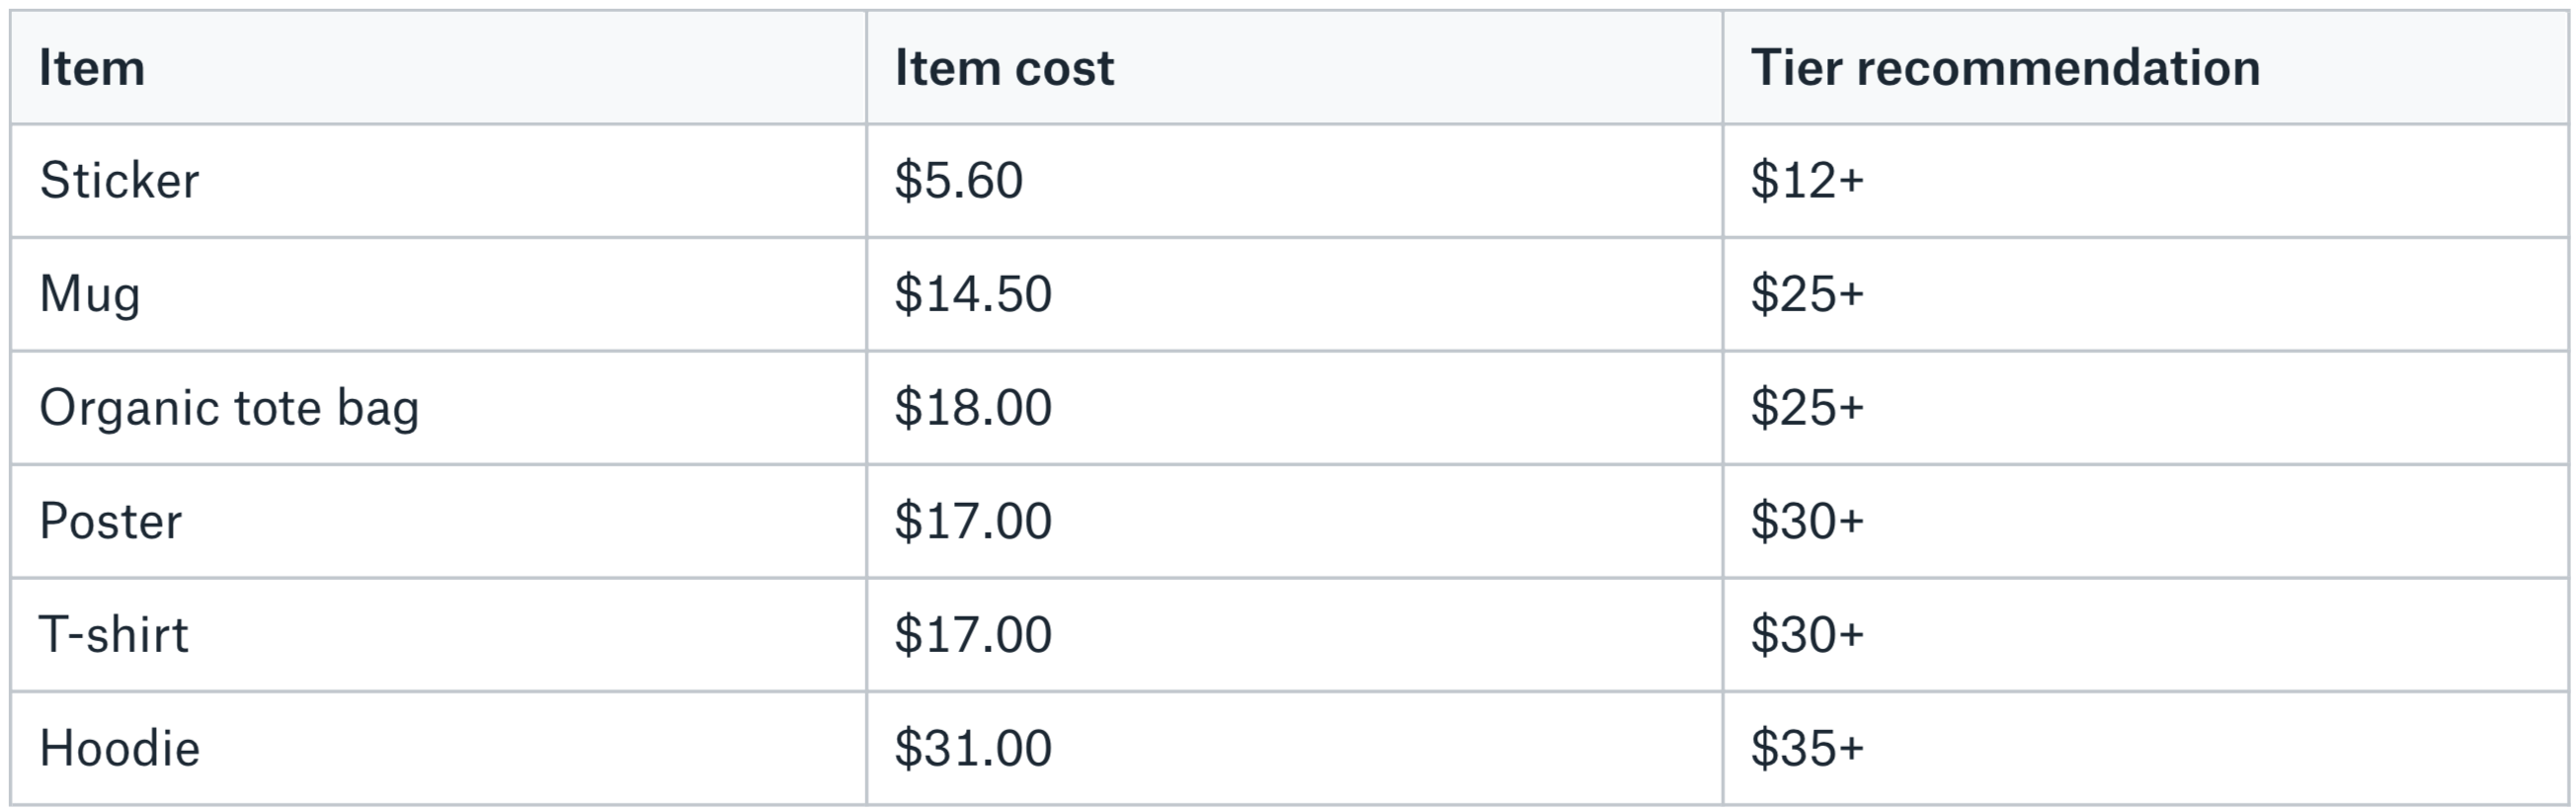 Recommended_merch_costs.png